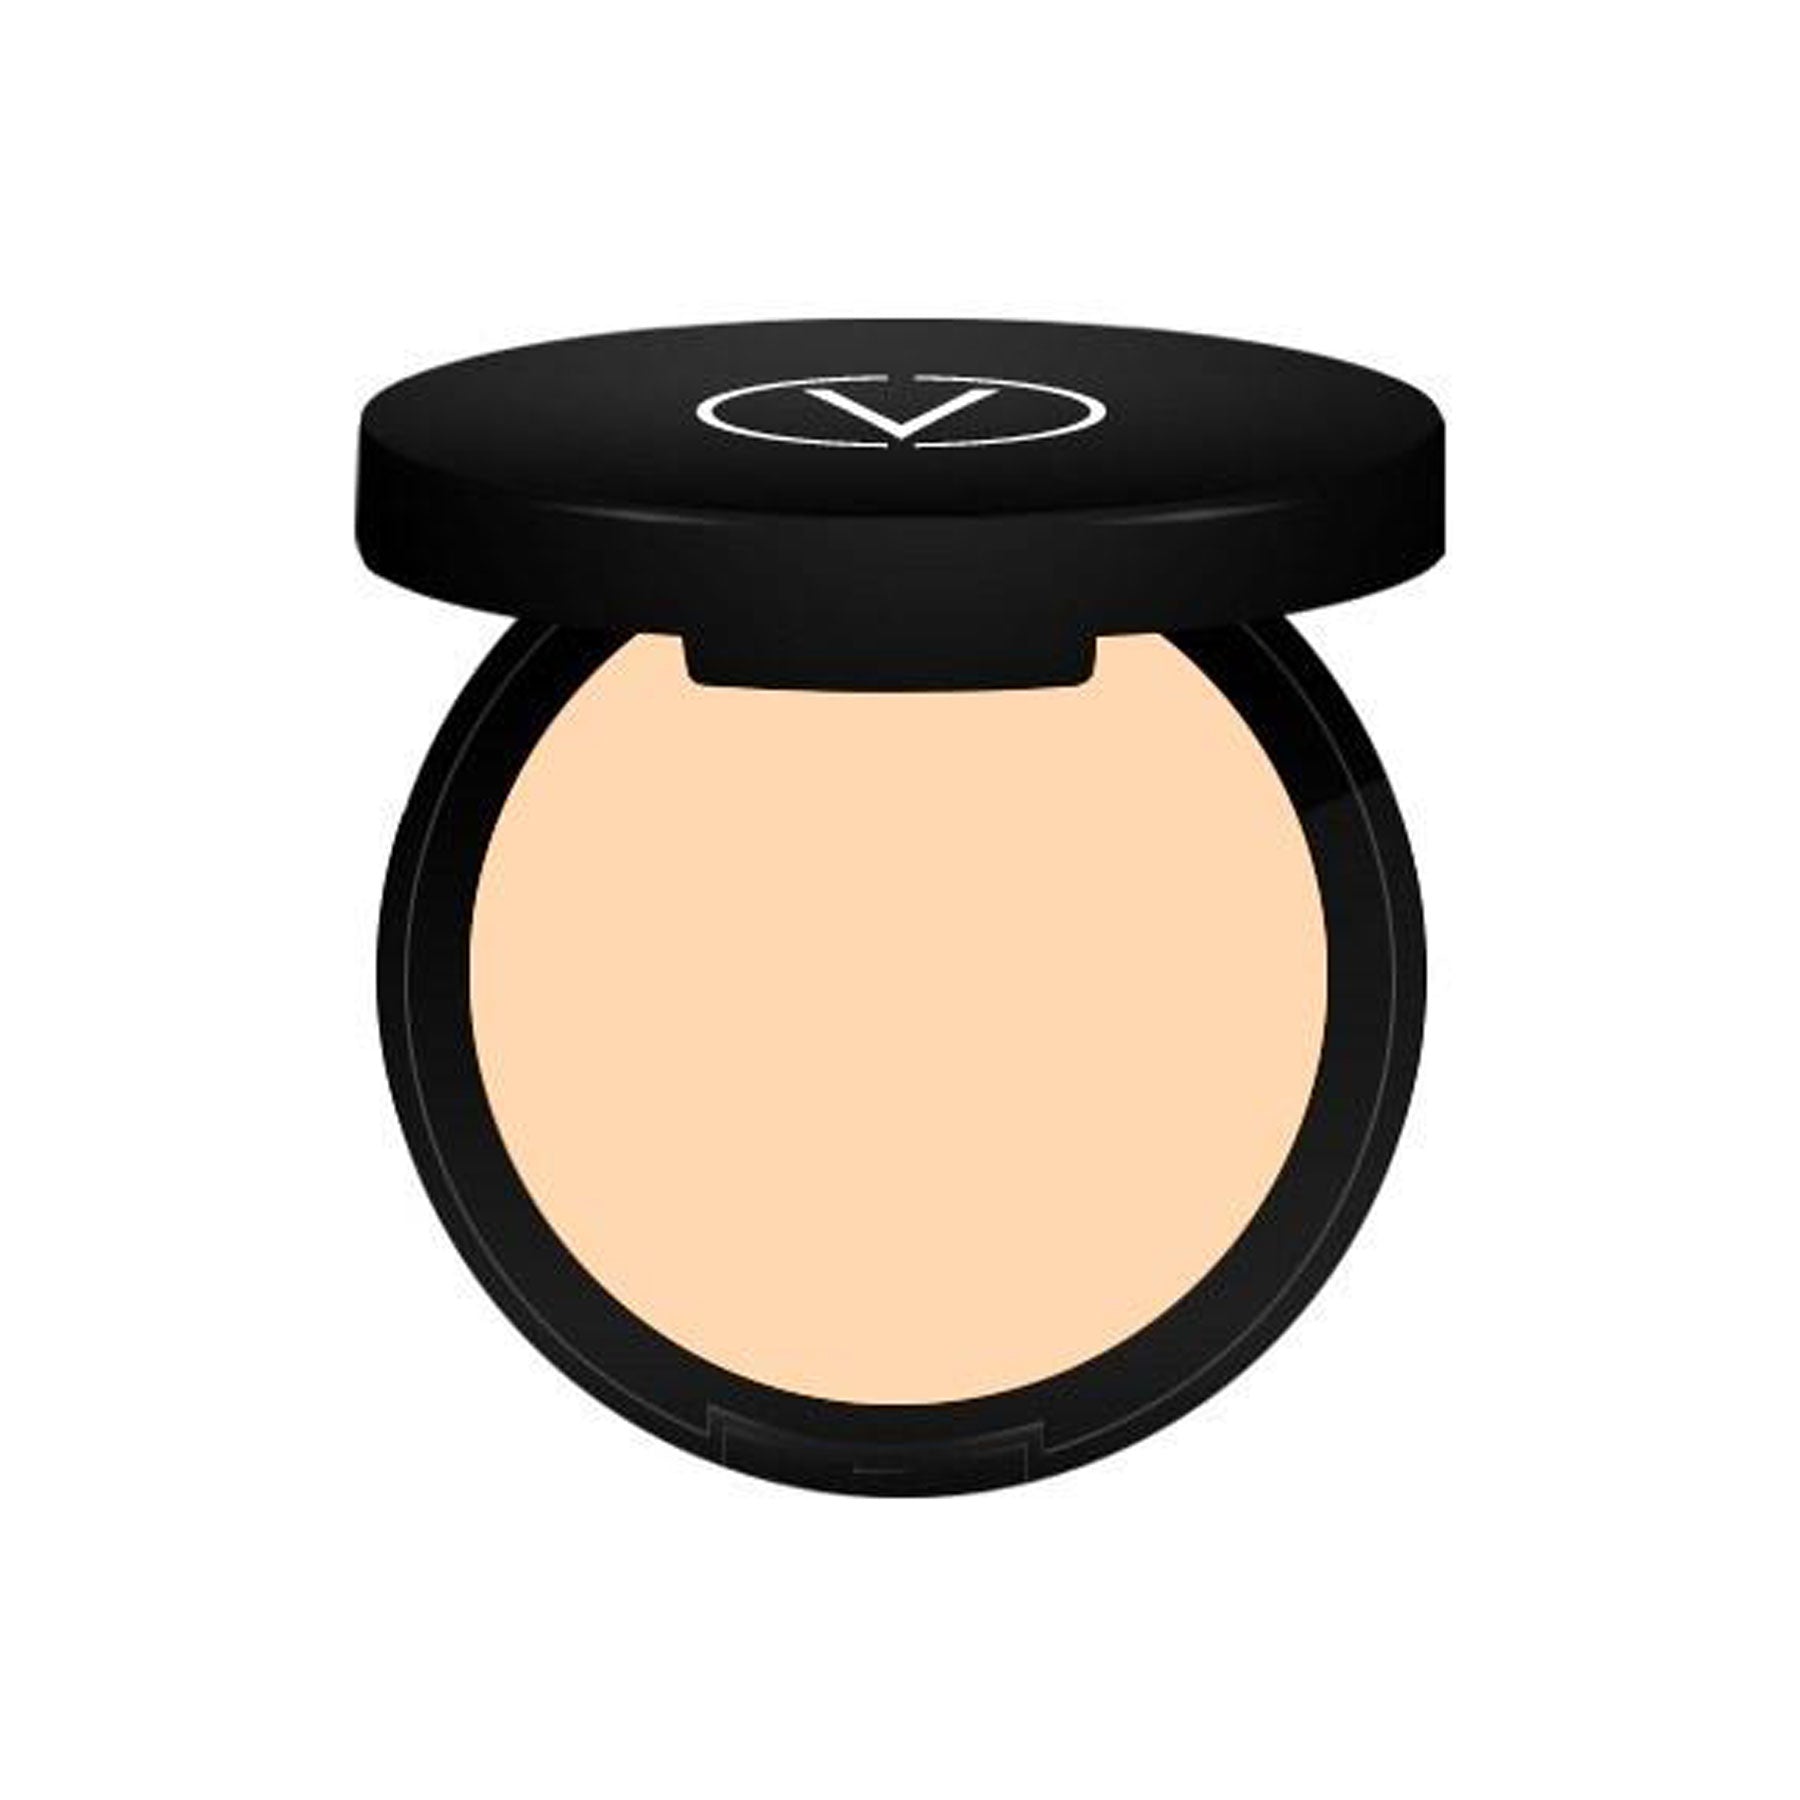 Deluxe Mineral Powder Foundation